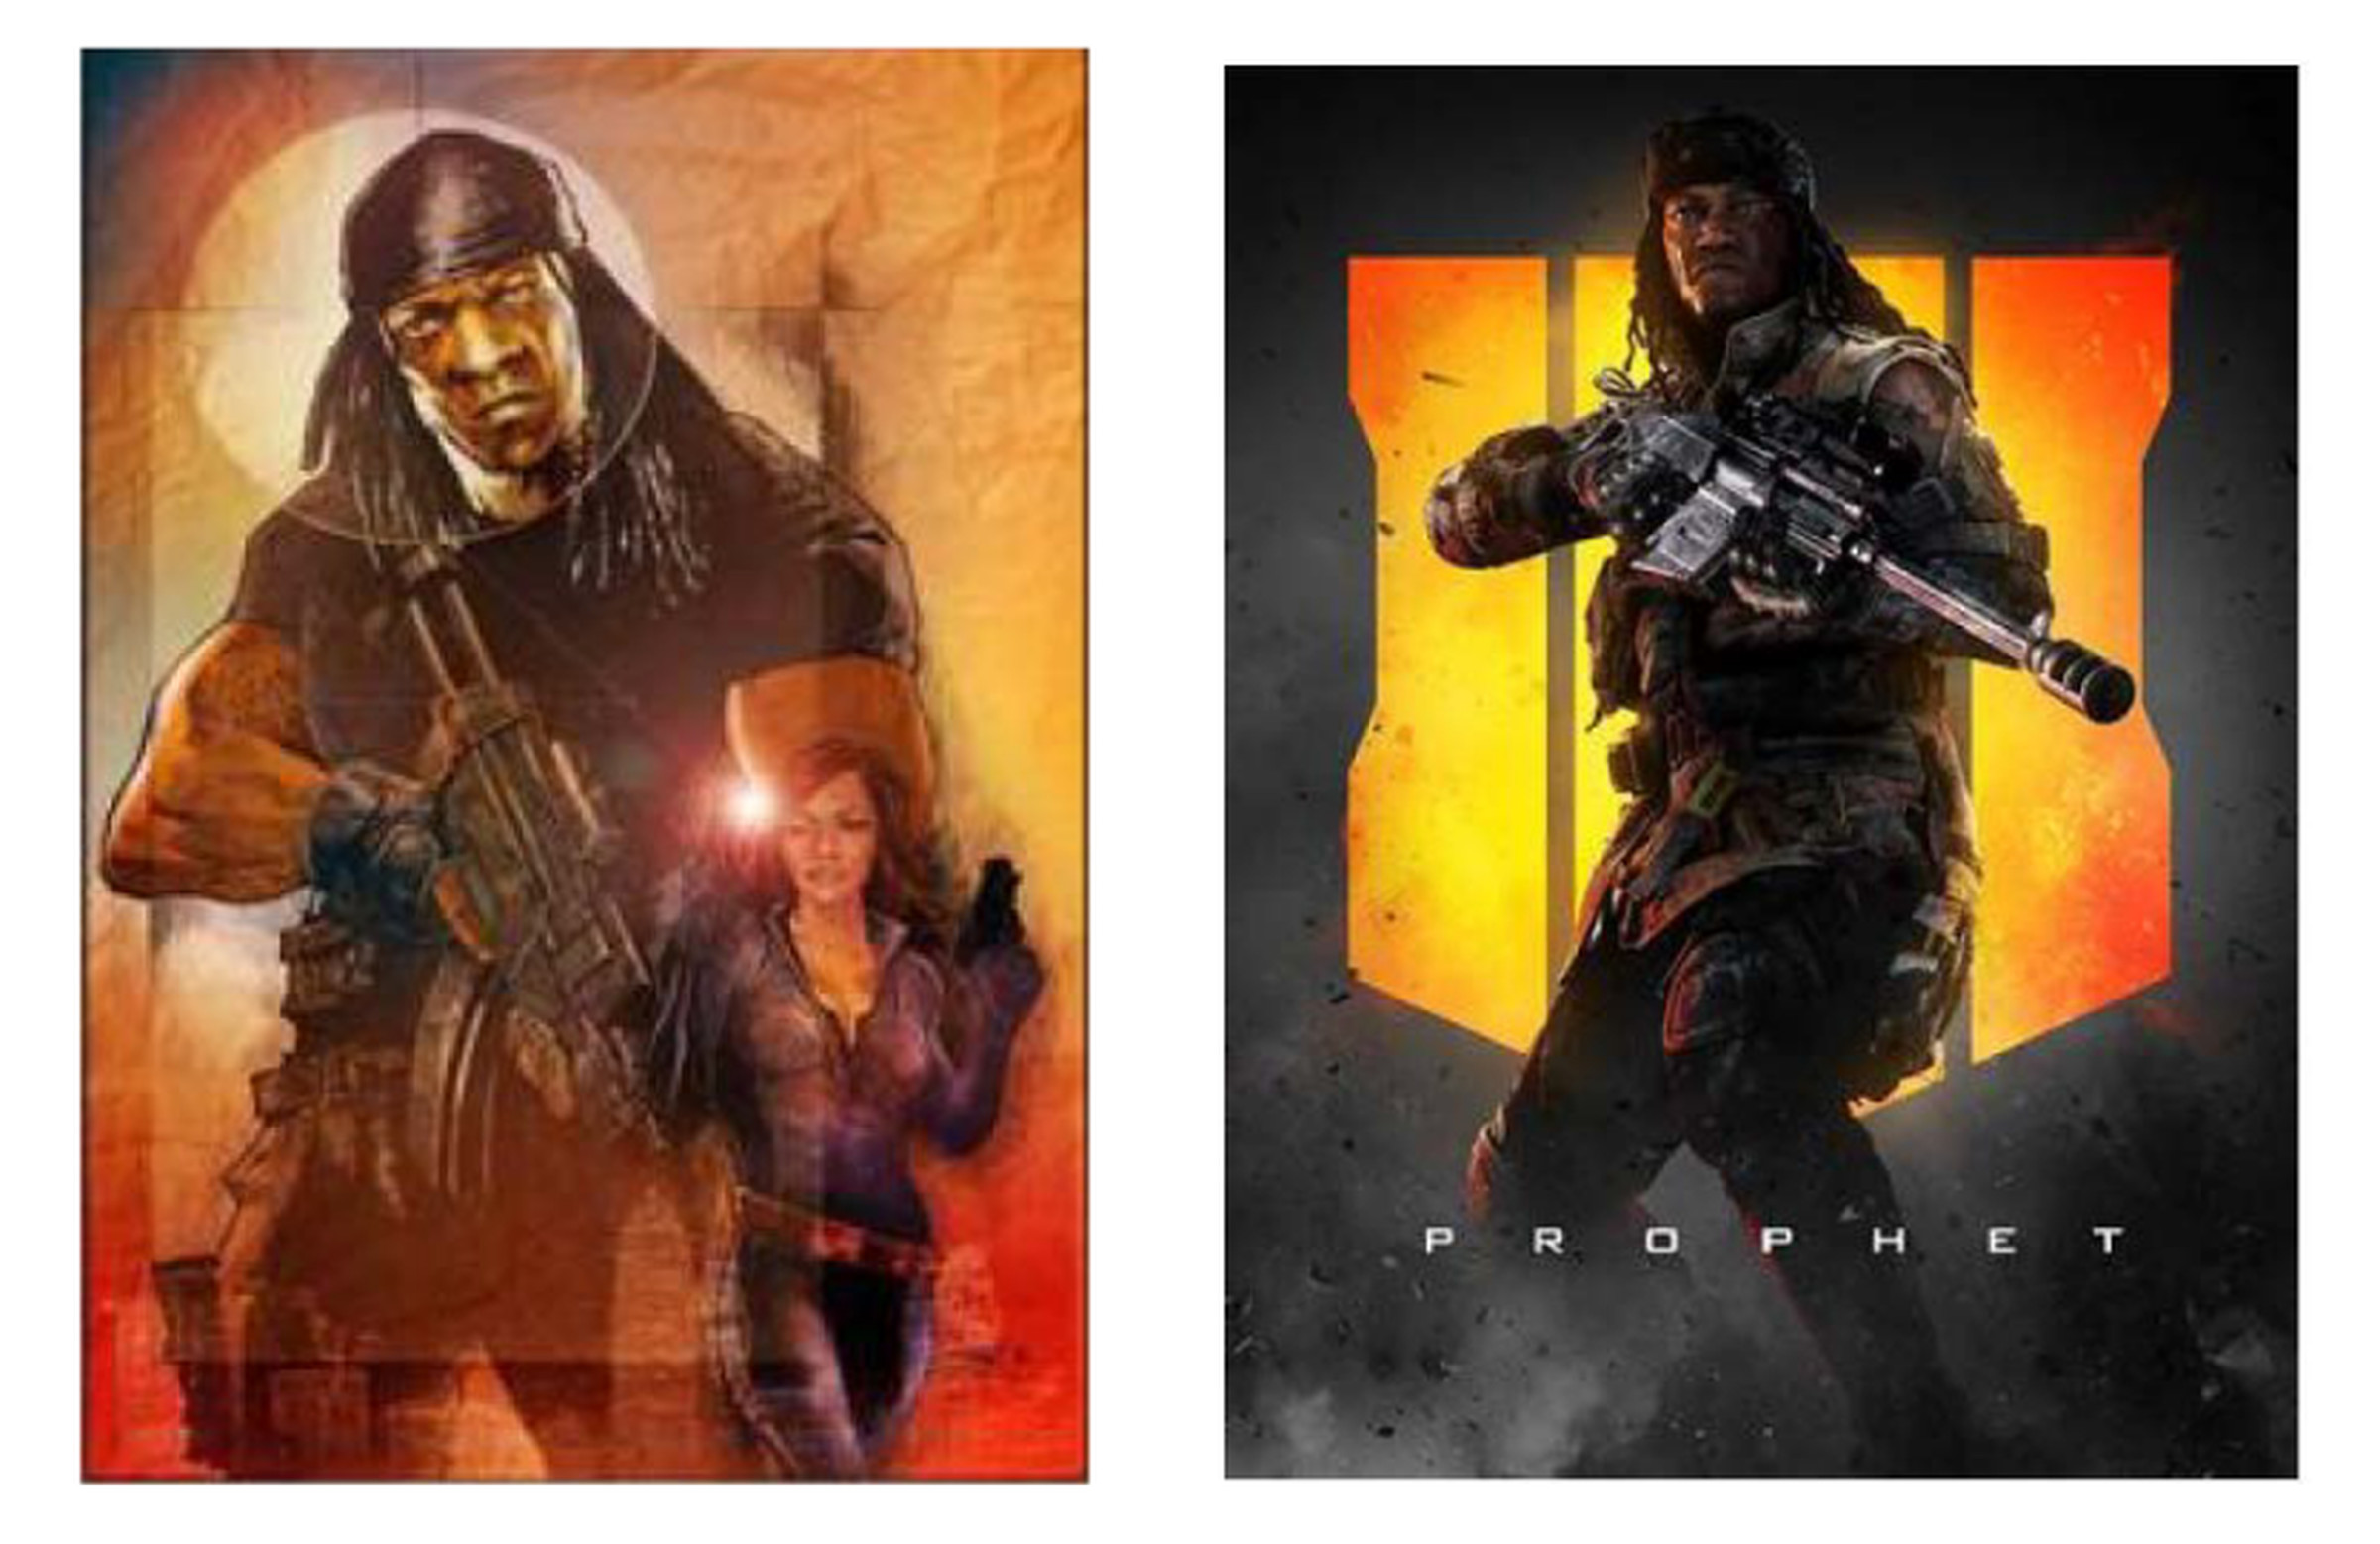 G.I. Bro drawing (left), Call of Duty: Black Ops 4 image of Prophet (right)